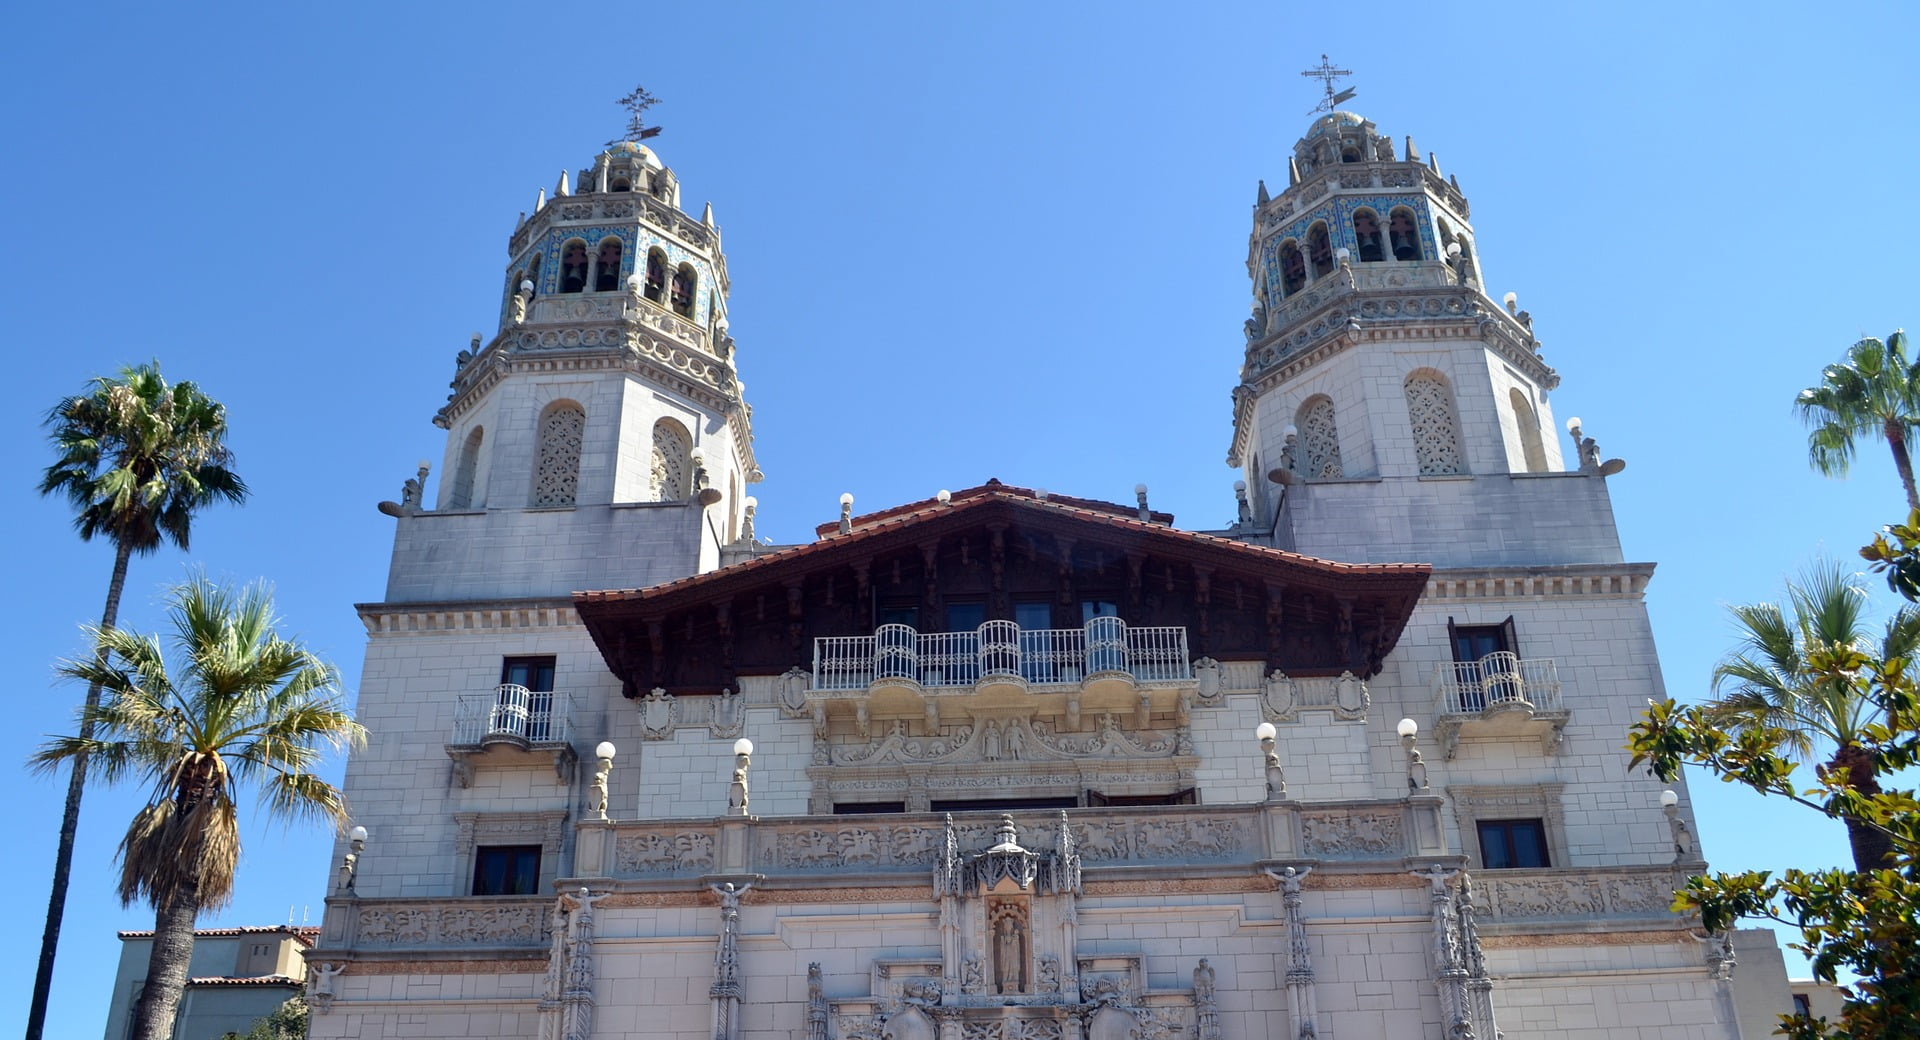 Visiting The Hearst Castle? Don’t Miss These Tips!